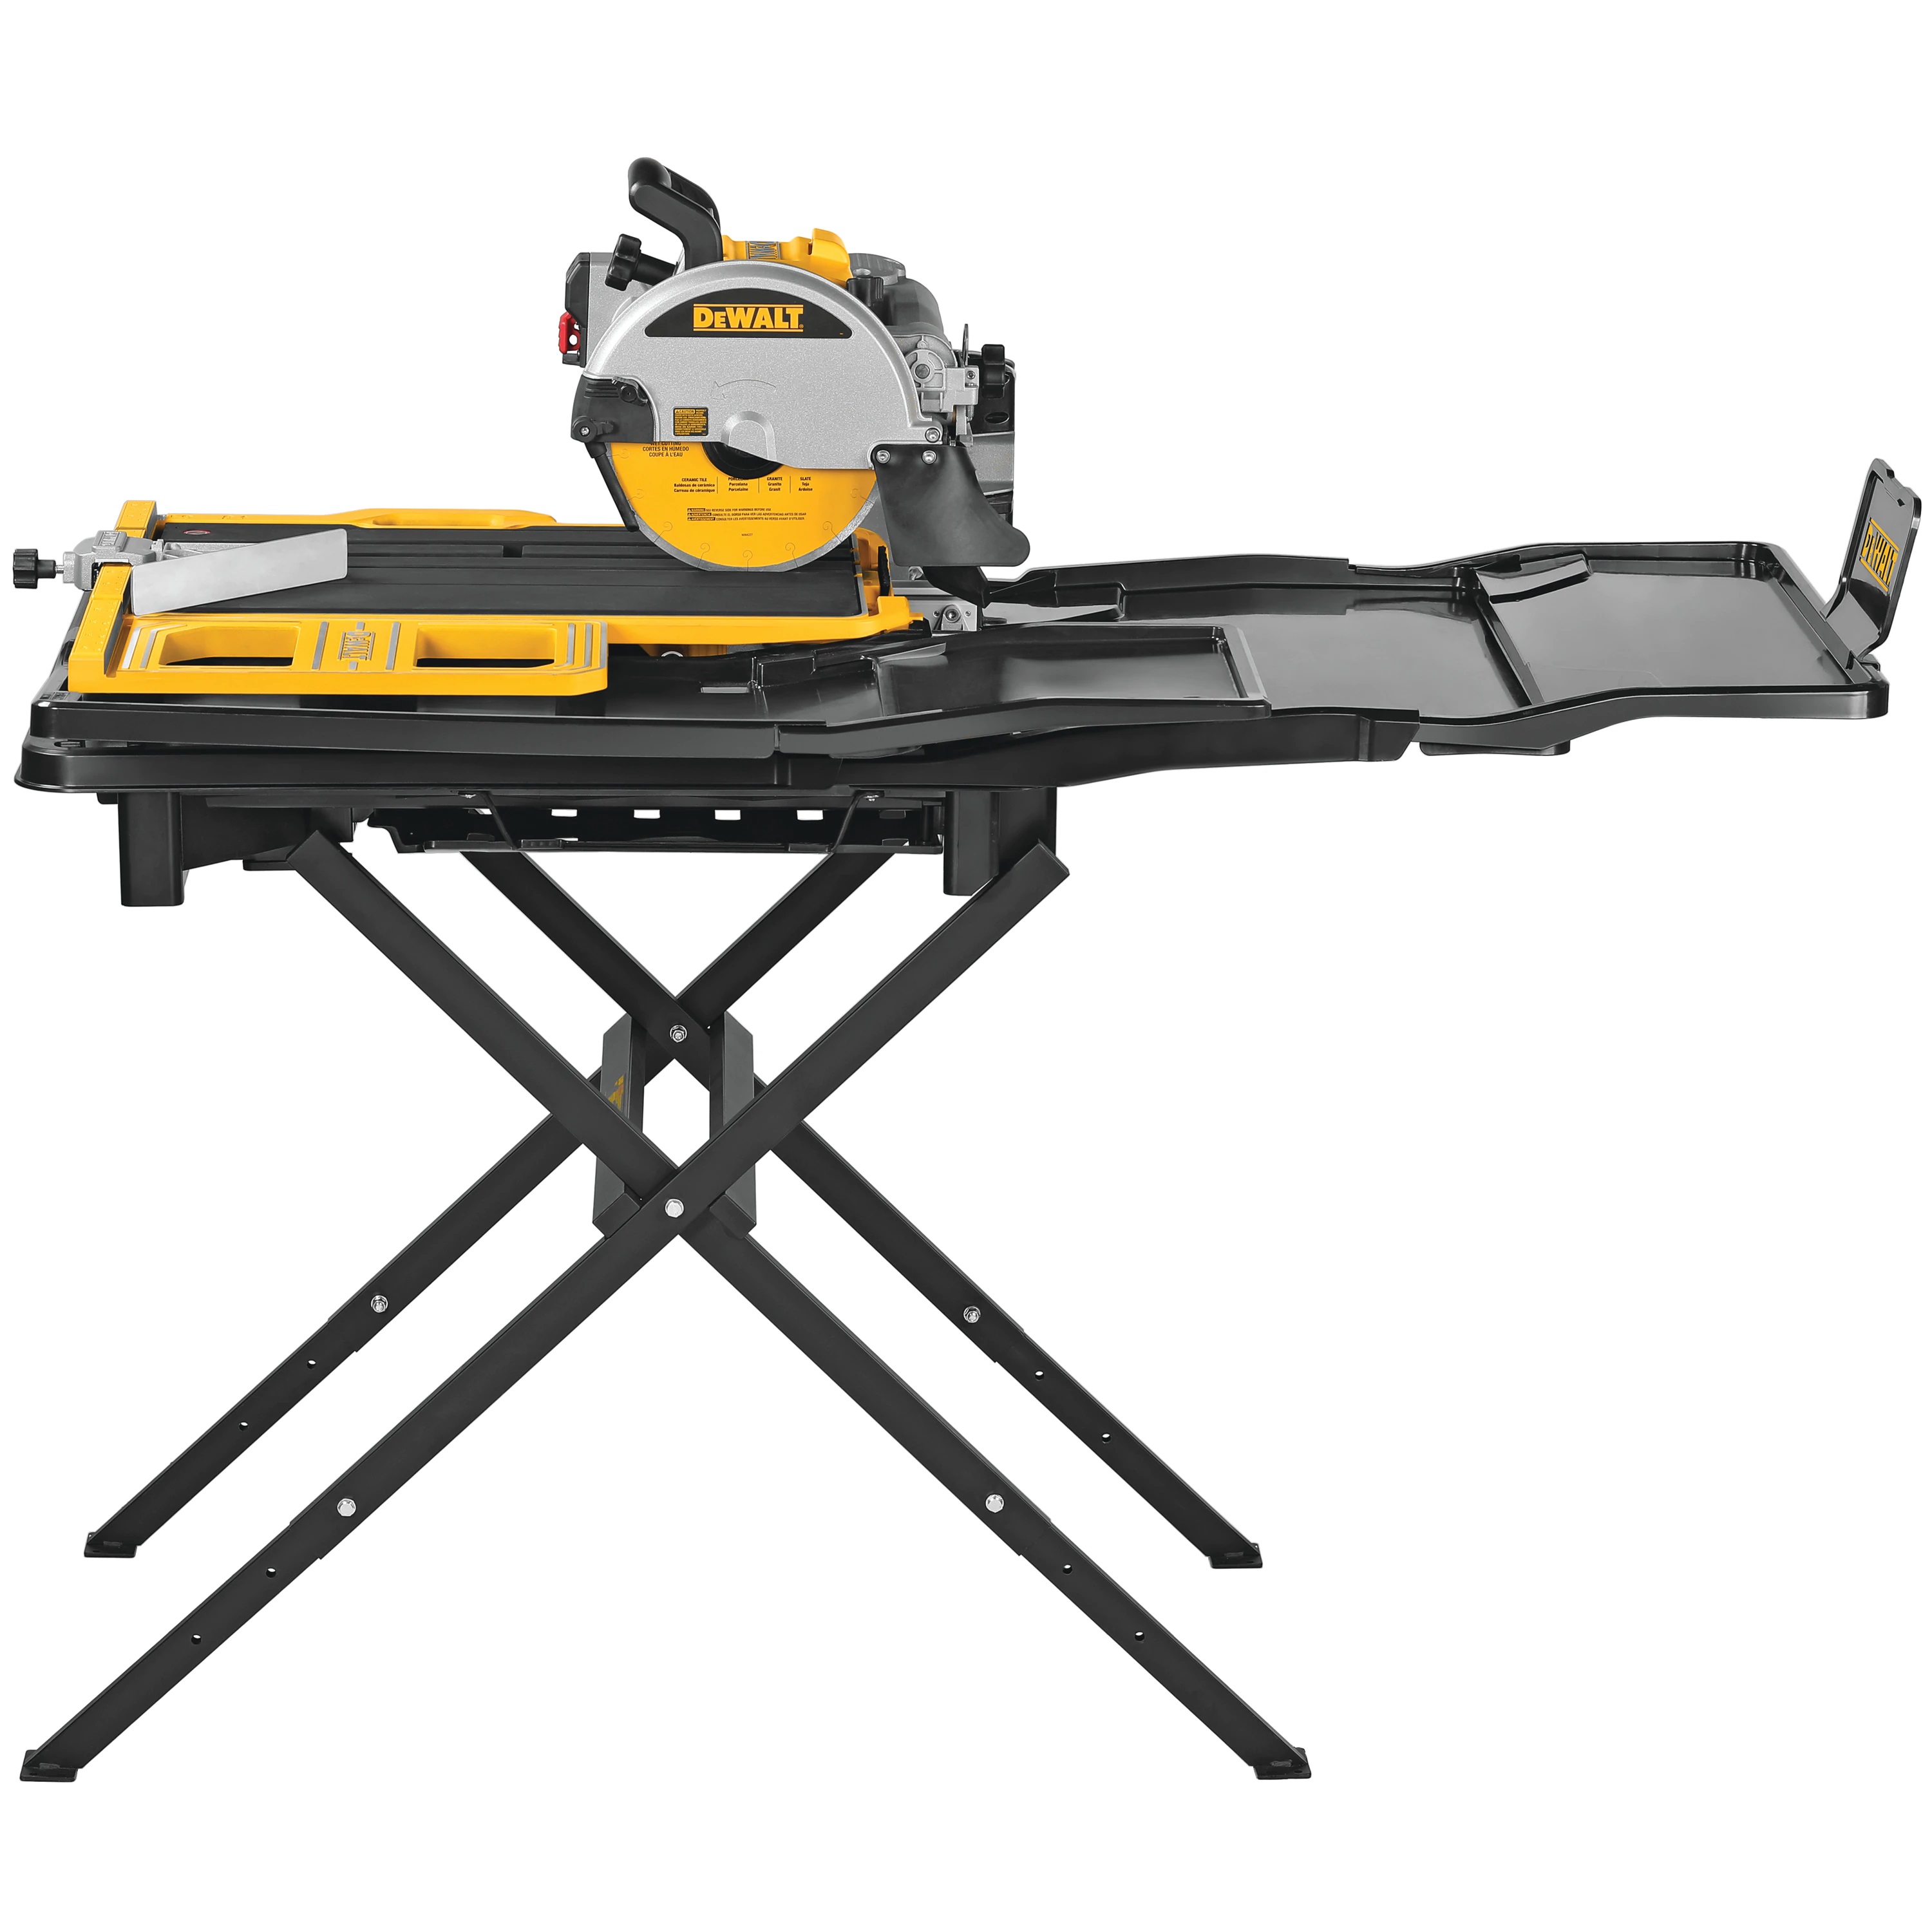 DEWALT DEW-D36000S 10 In. High Capacity Wet Tile Saw With Stand  Atlas-Machinery